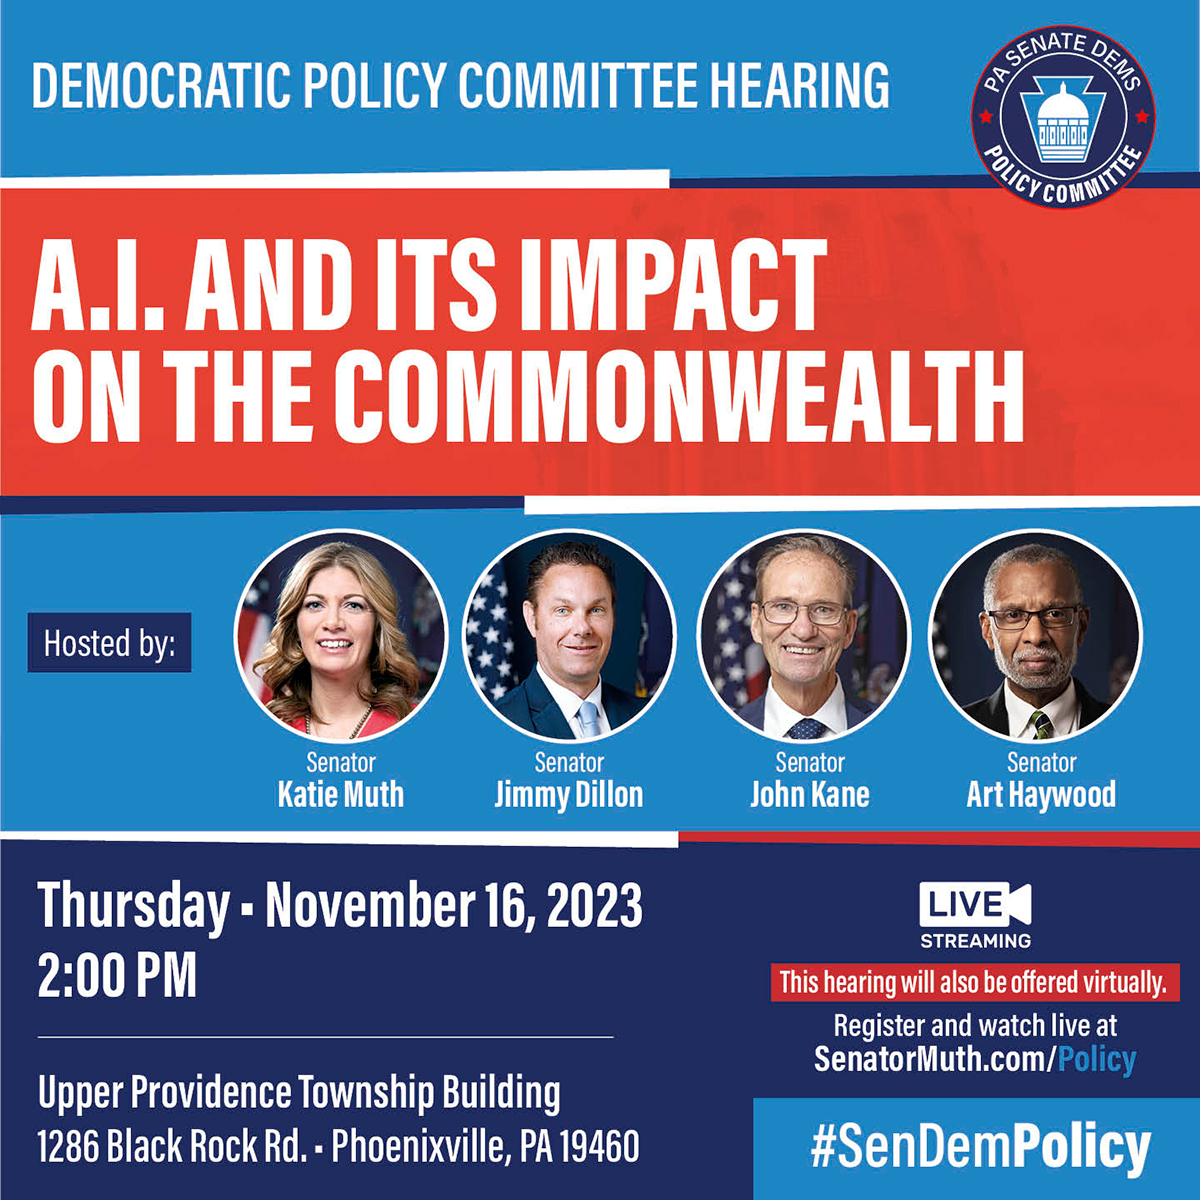 Policy Hearing - A.I. and Its Impact on the Commonwealth